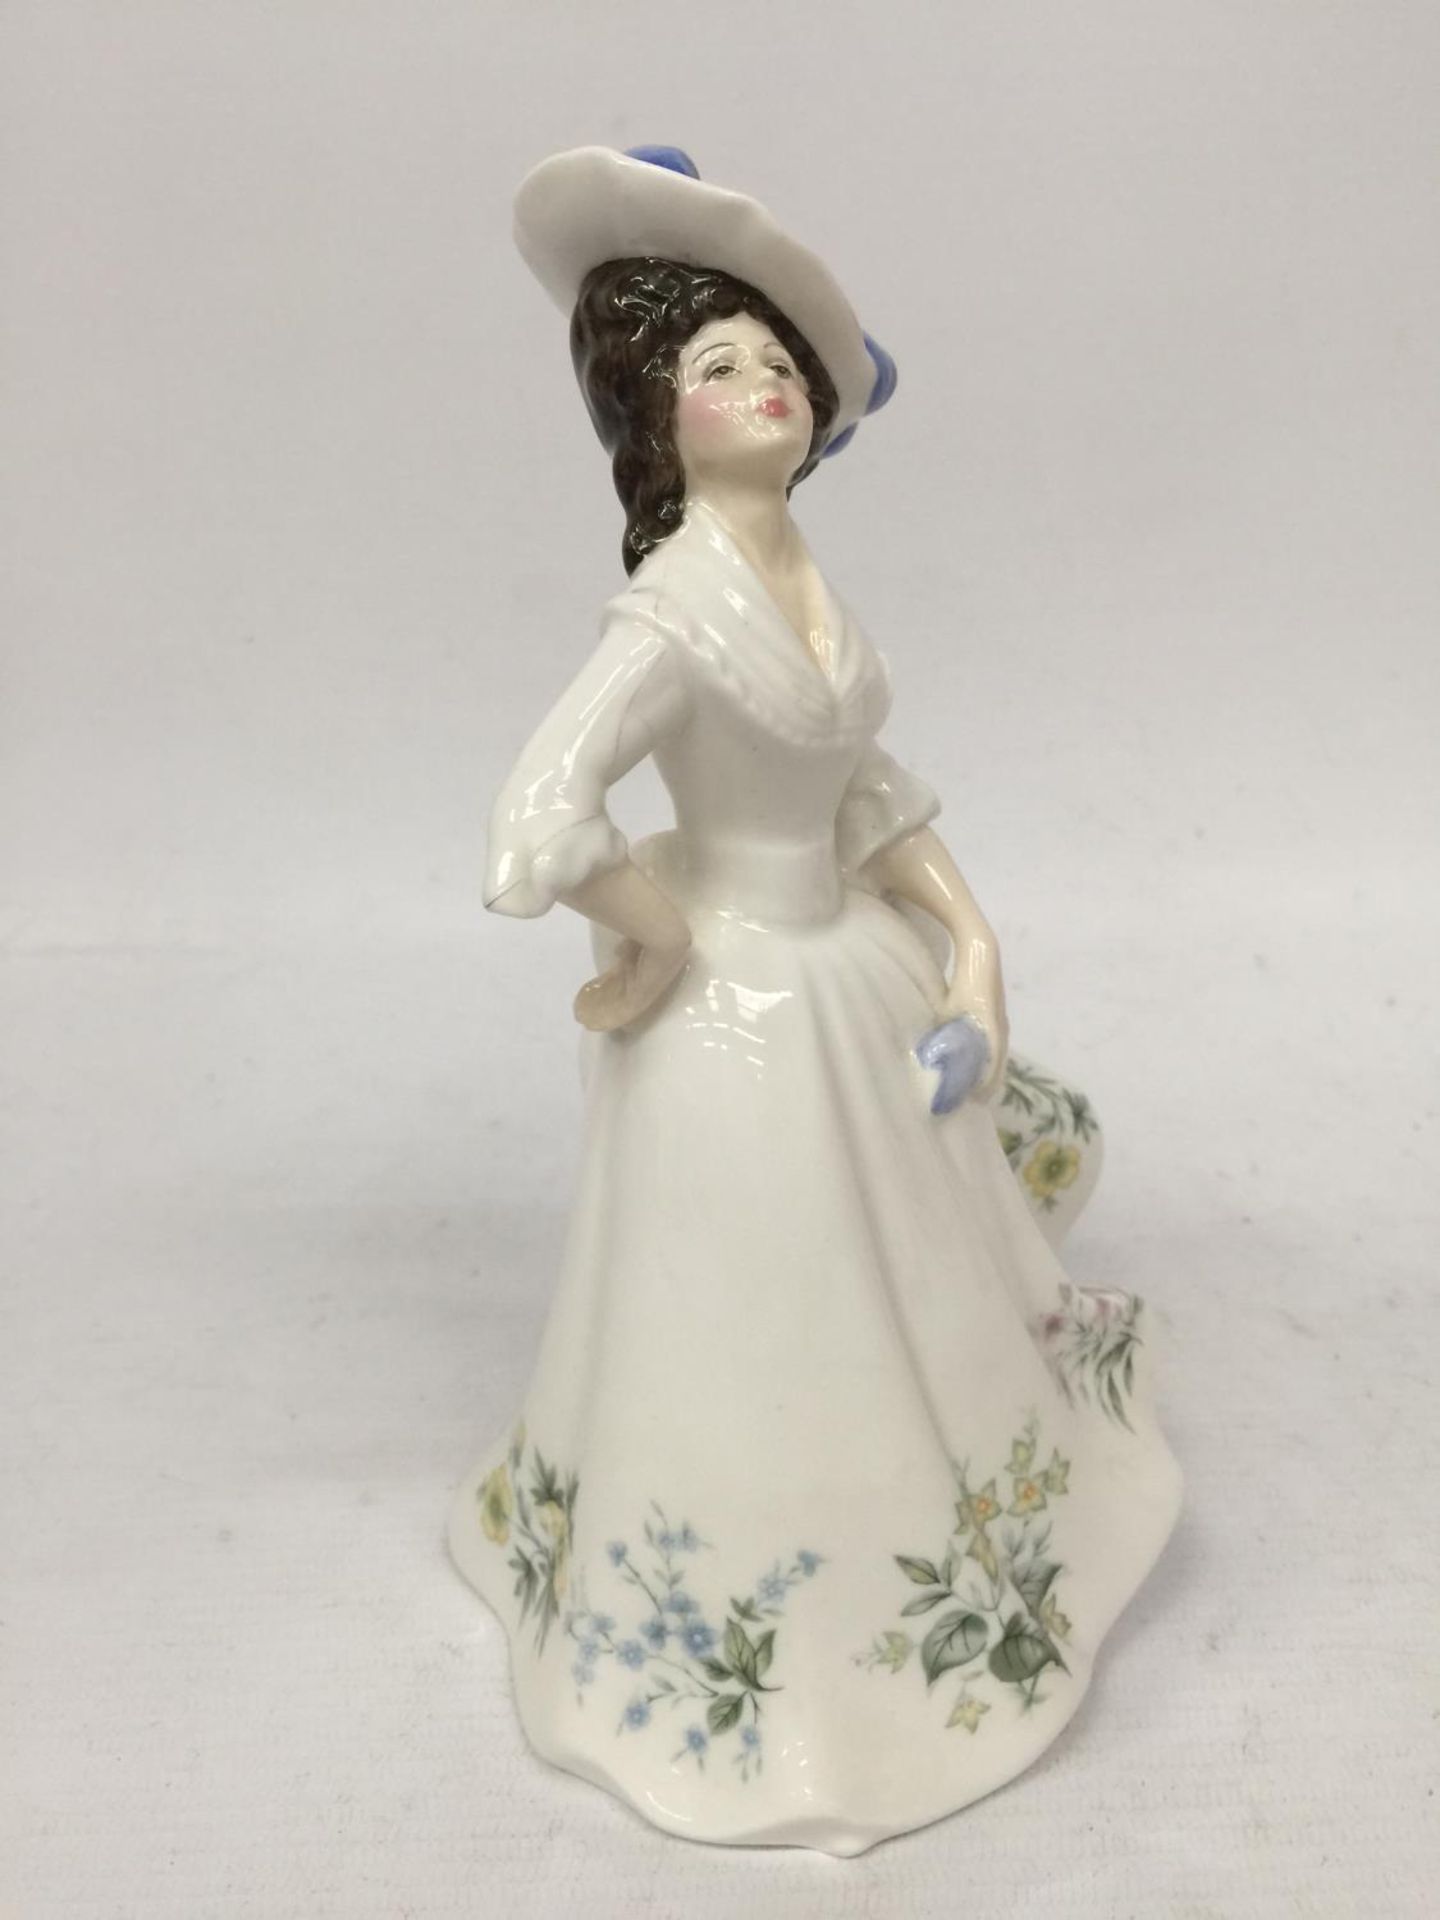 A ROYAL DOULTON FIGURINE "ADELE" - 21 CM (SECONDS) A/F - Image 2 of 4